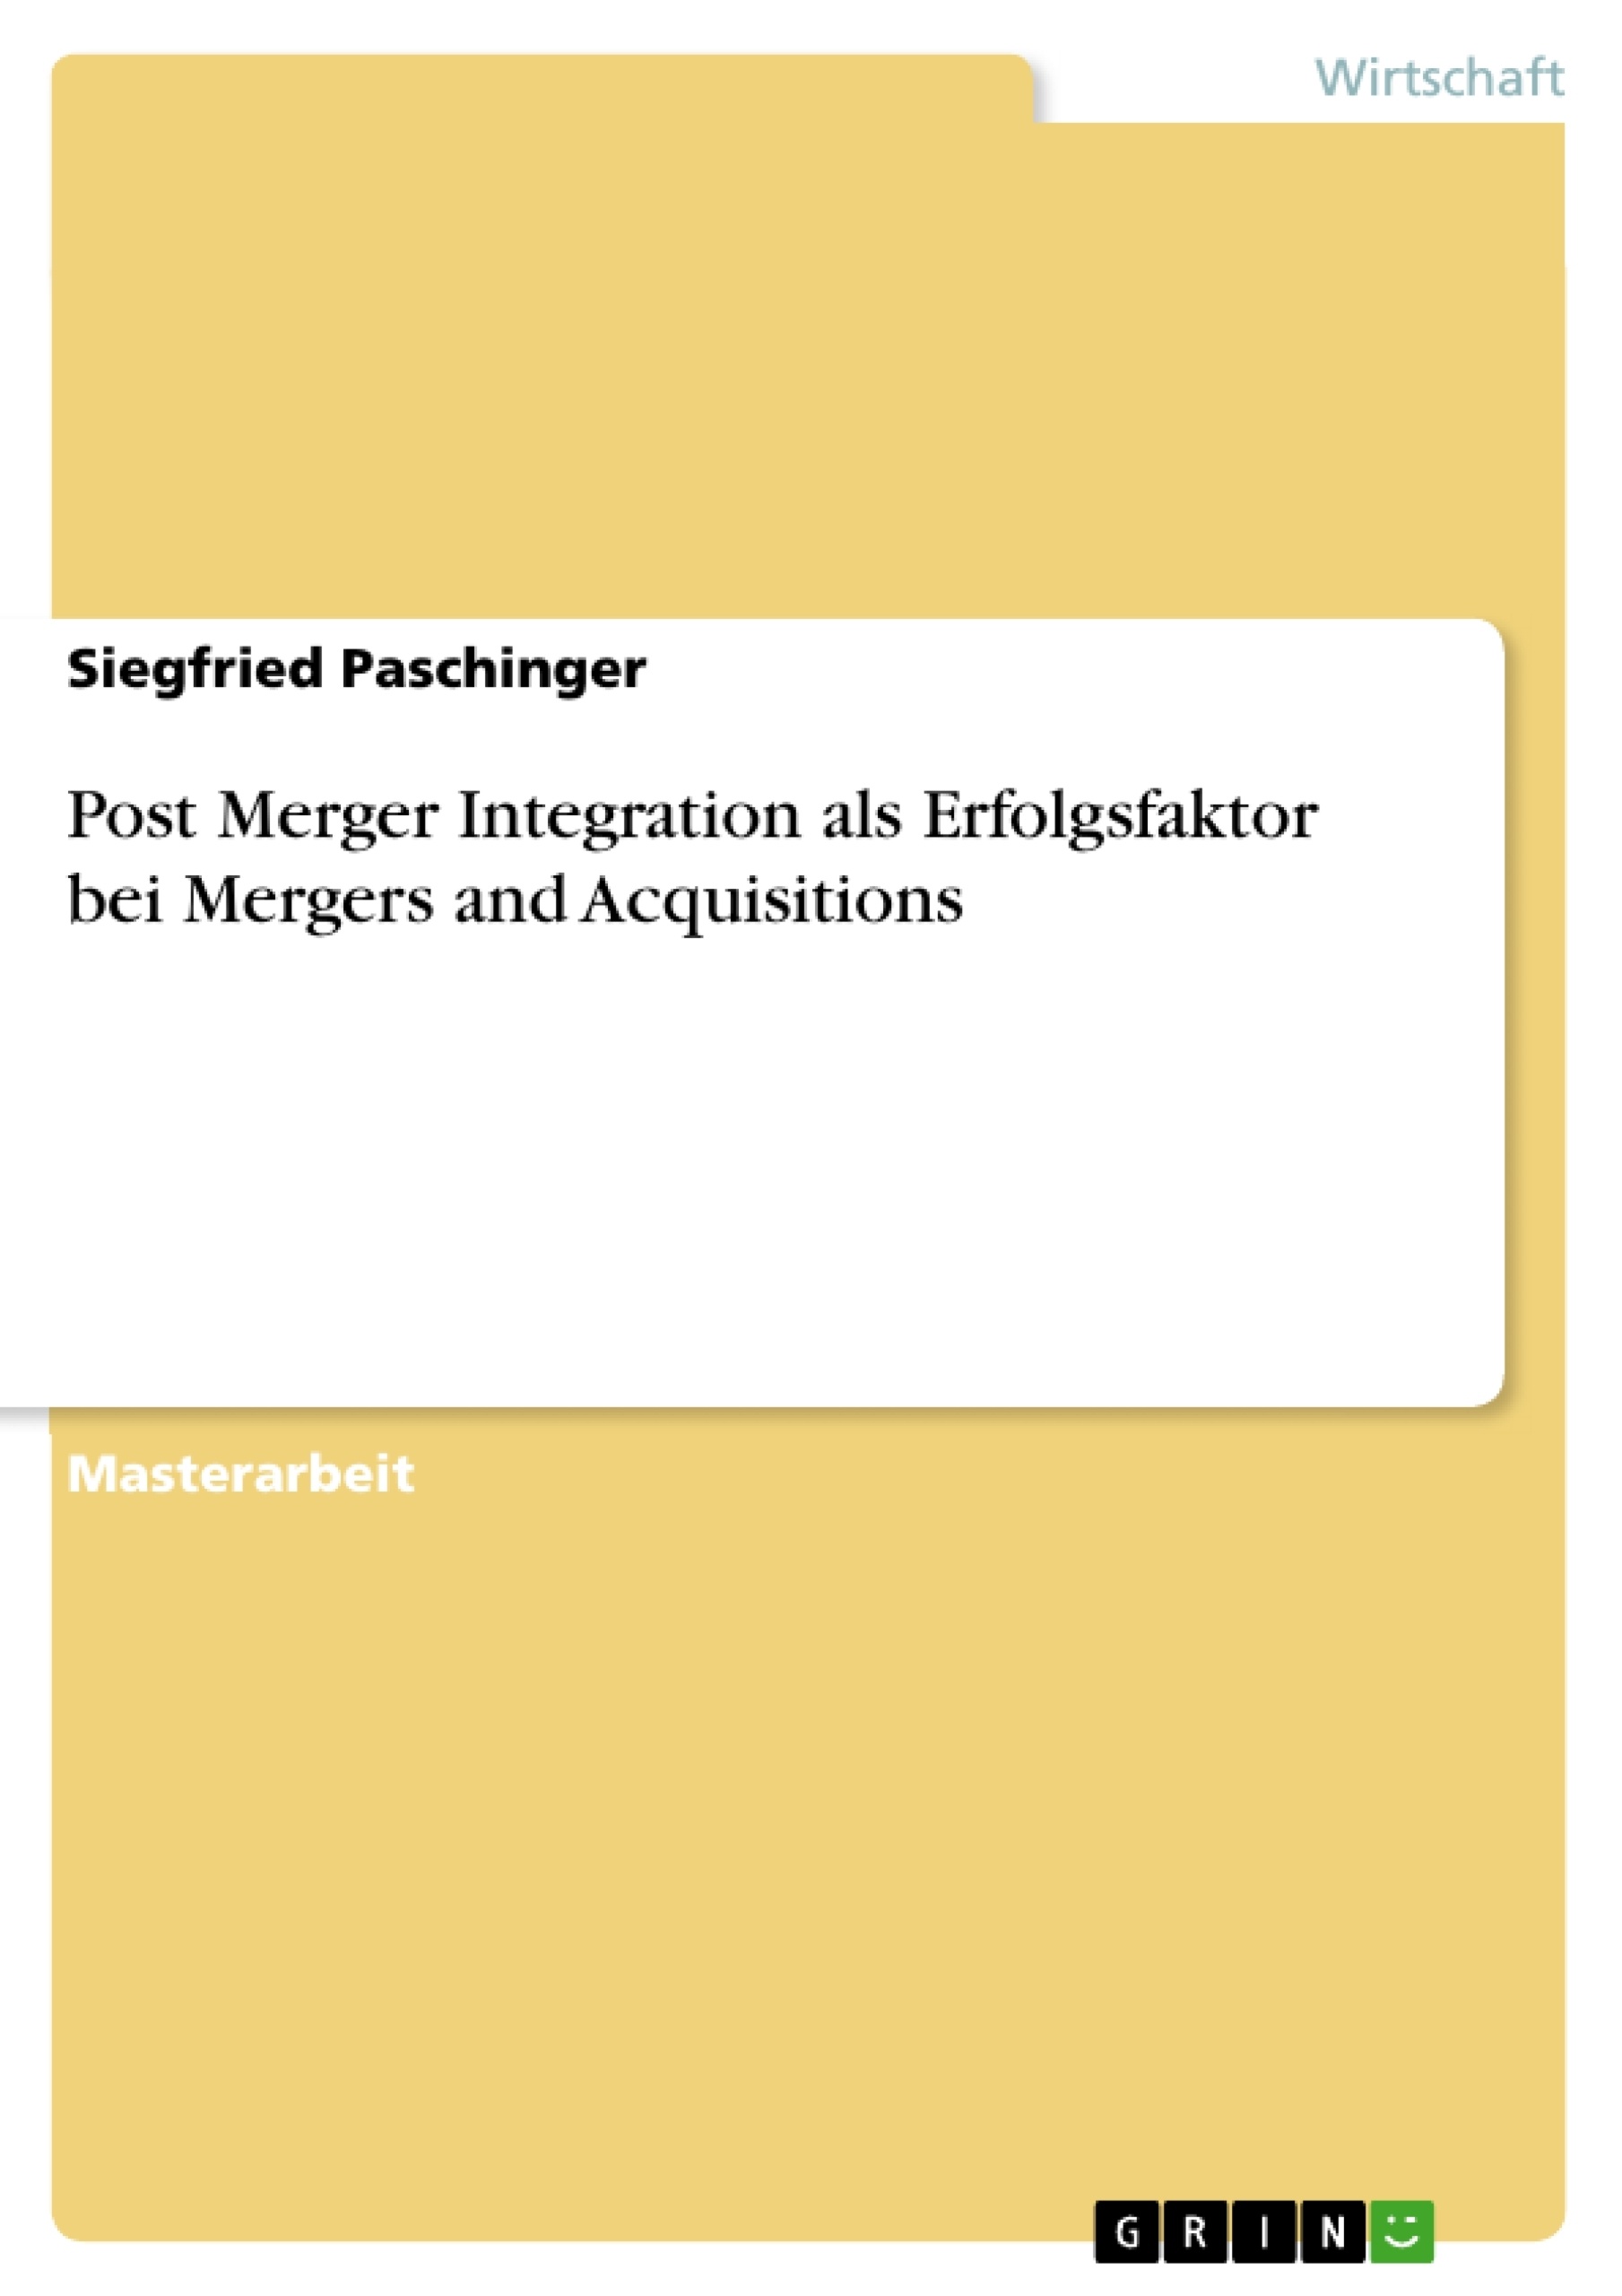 Título: Post Merger Integration als Erfolgsfaktor bei Mergers and Acquisitions